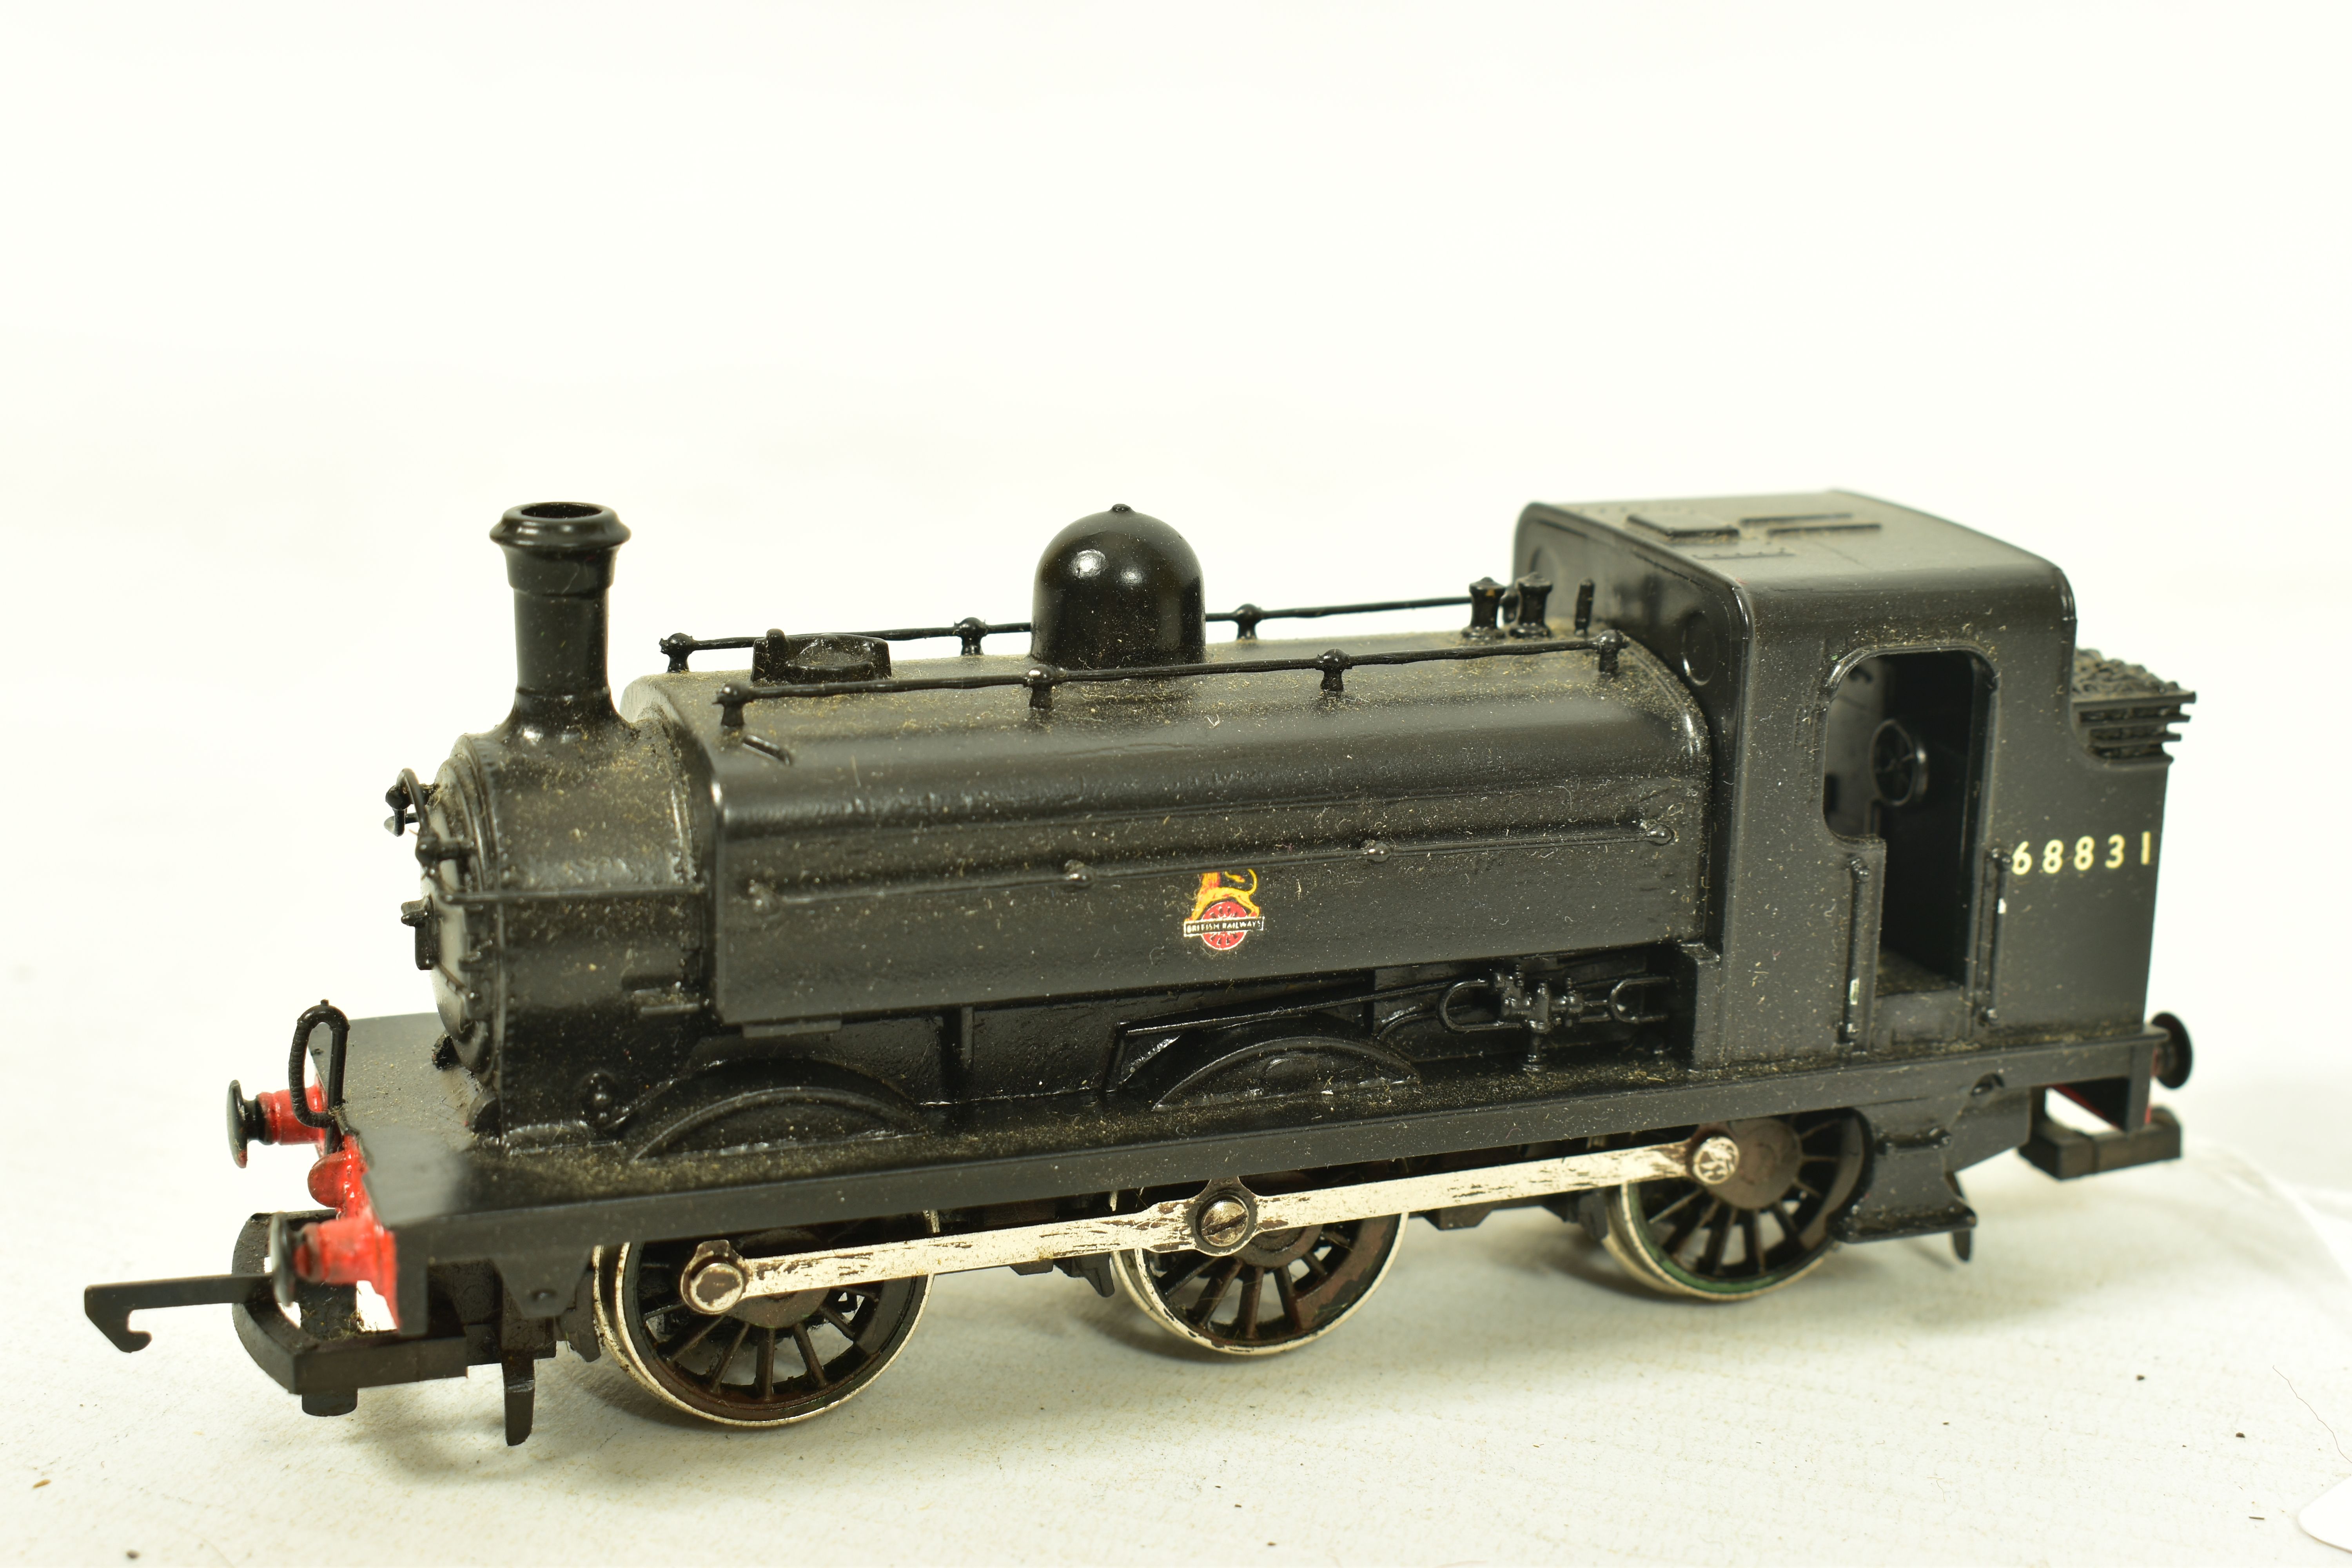 FIVE BOXED HORNBY OO GAUGE TANK LOCOMOTIVES, class B7 Pug, No.11250, L.M.S. black livery (R2065A), - Image 5 of 8